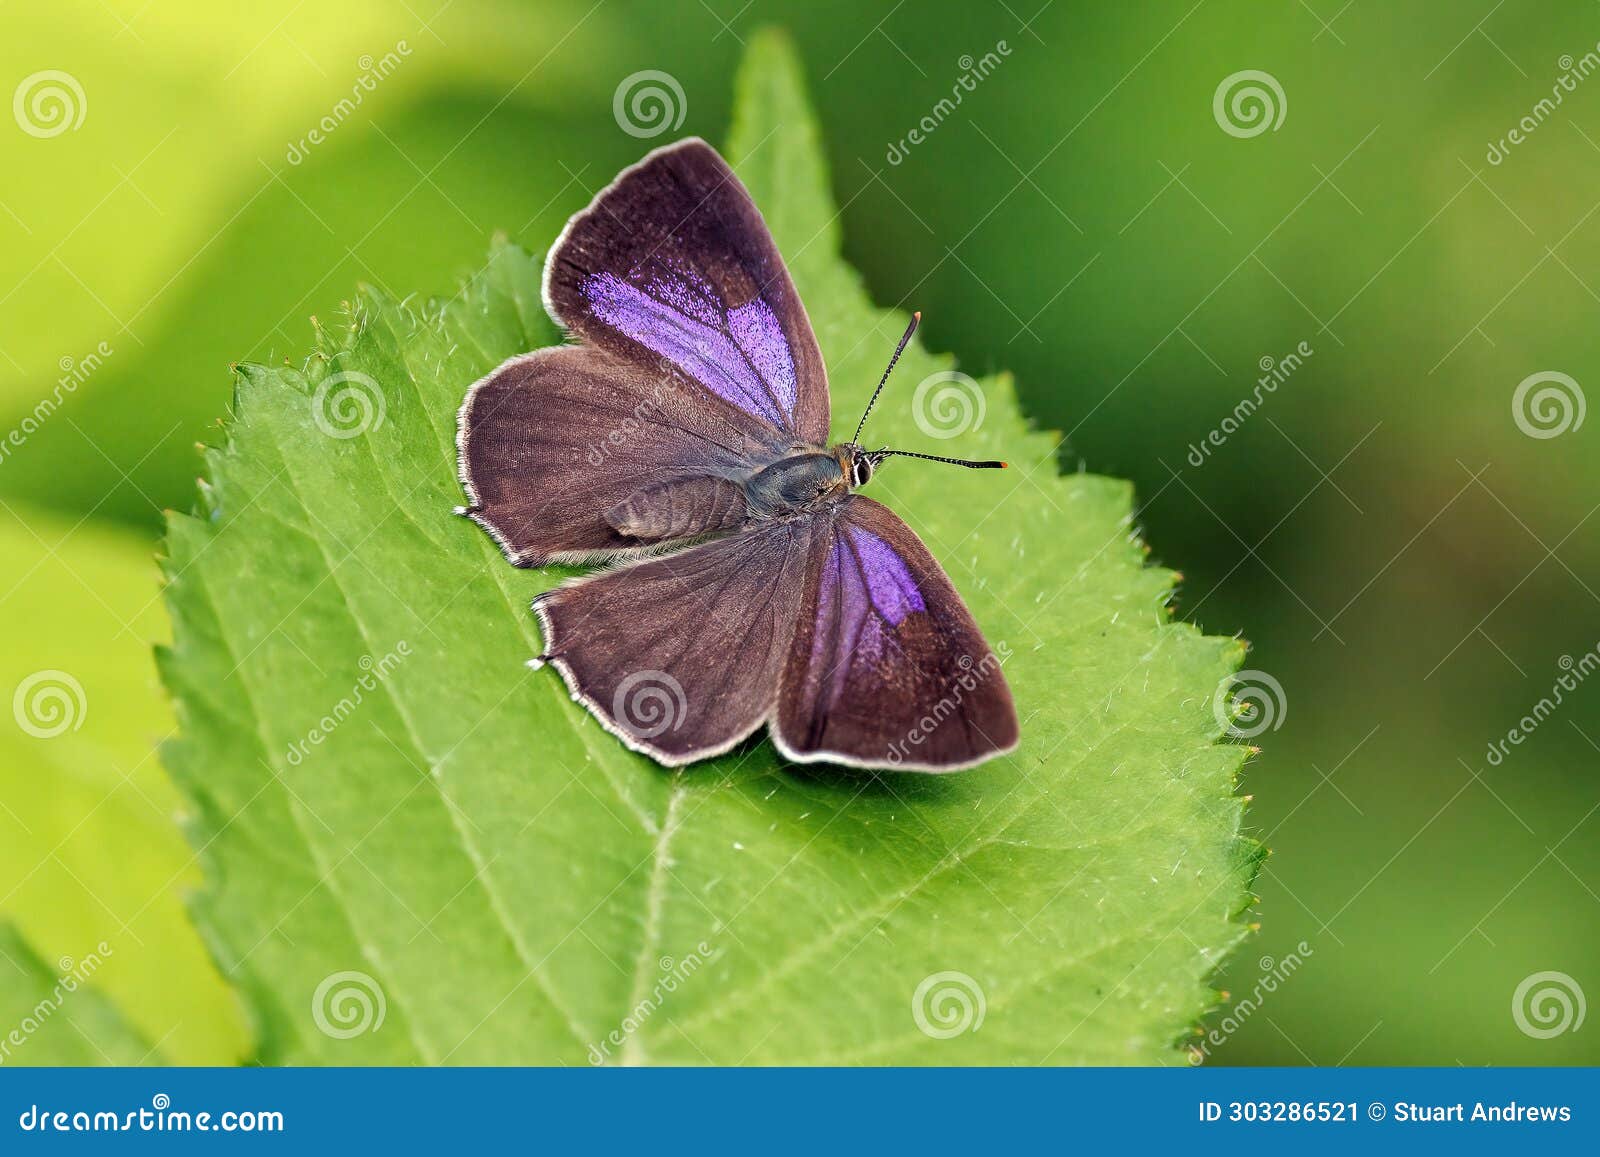 purple hairstreak butterfly - favonius quercus basking on a leaf.